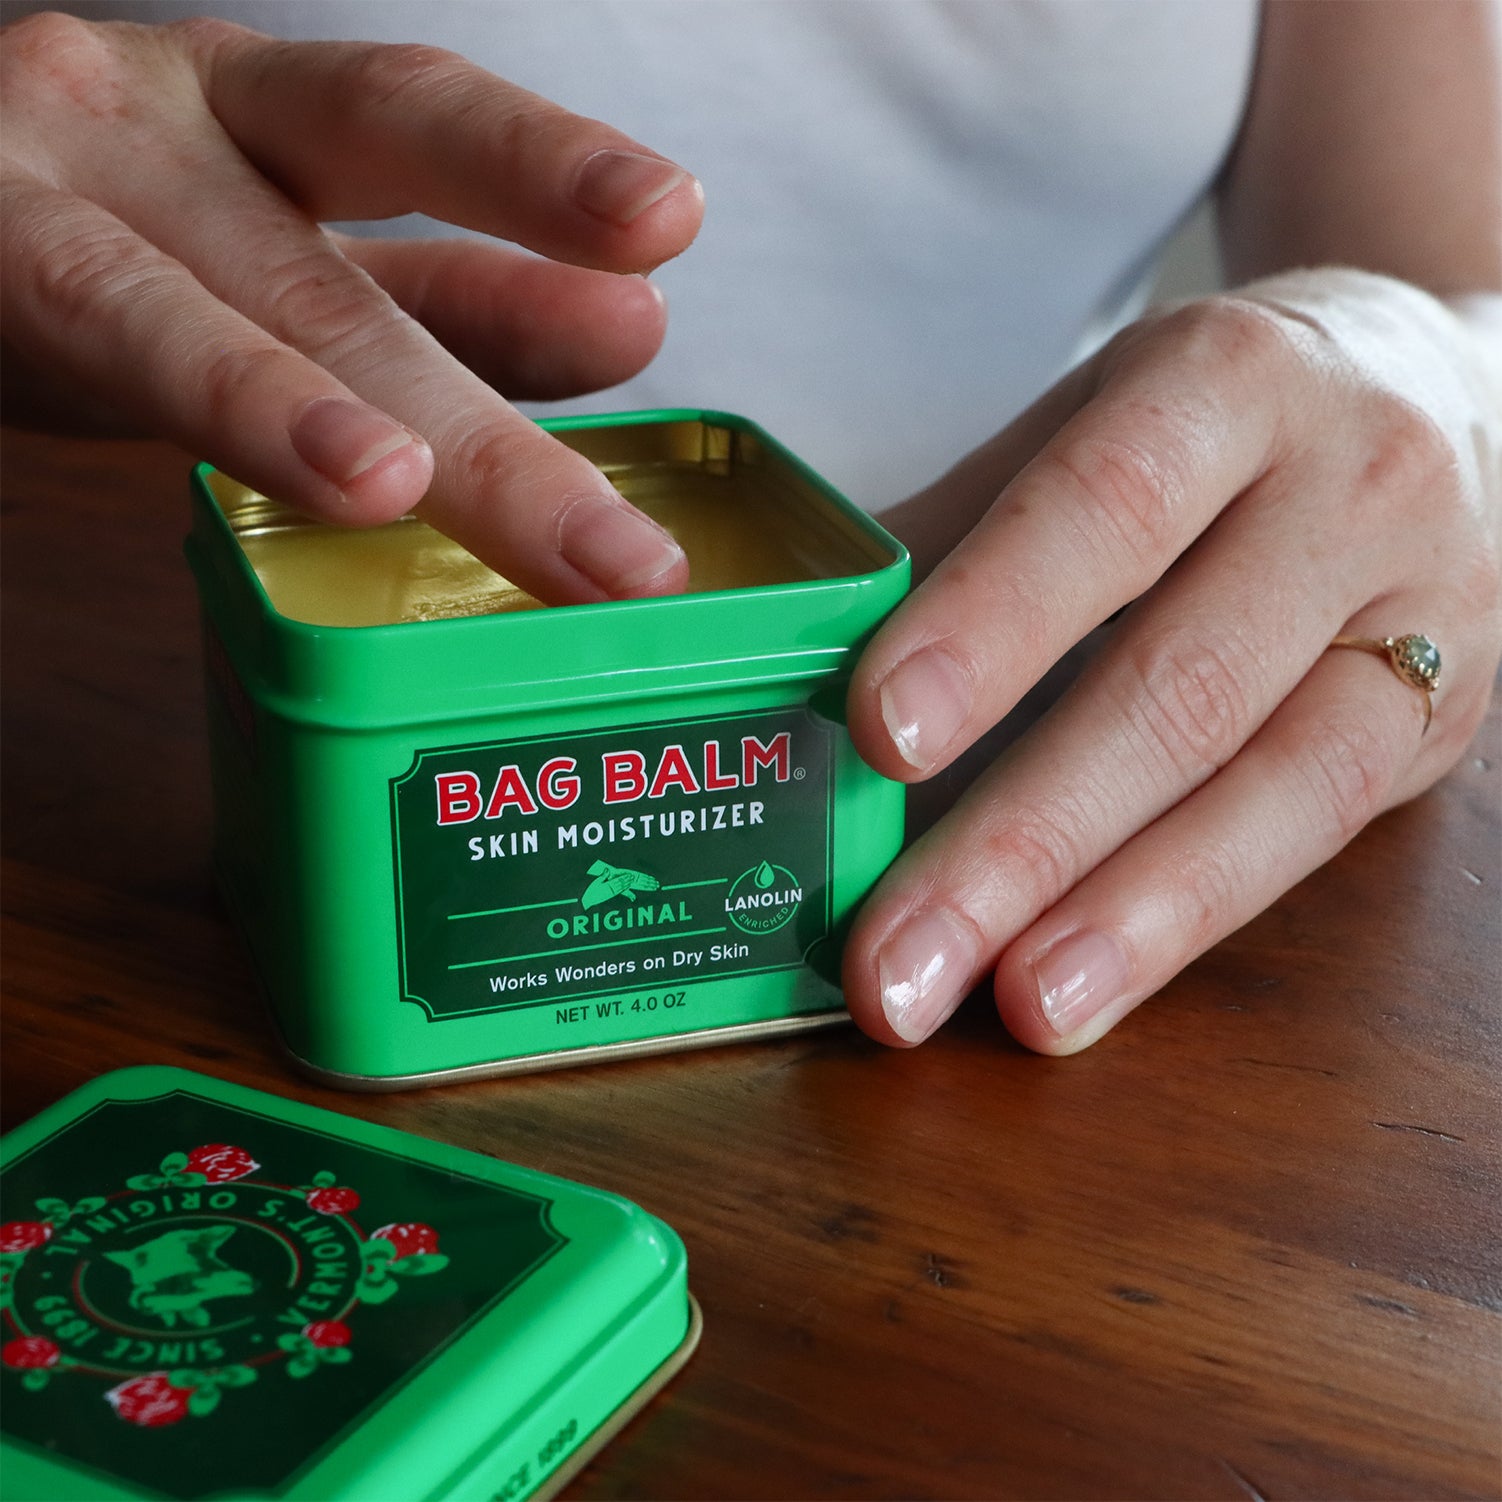 An open tin of Bag Balm with a person's hands reaching in